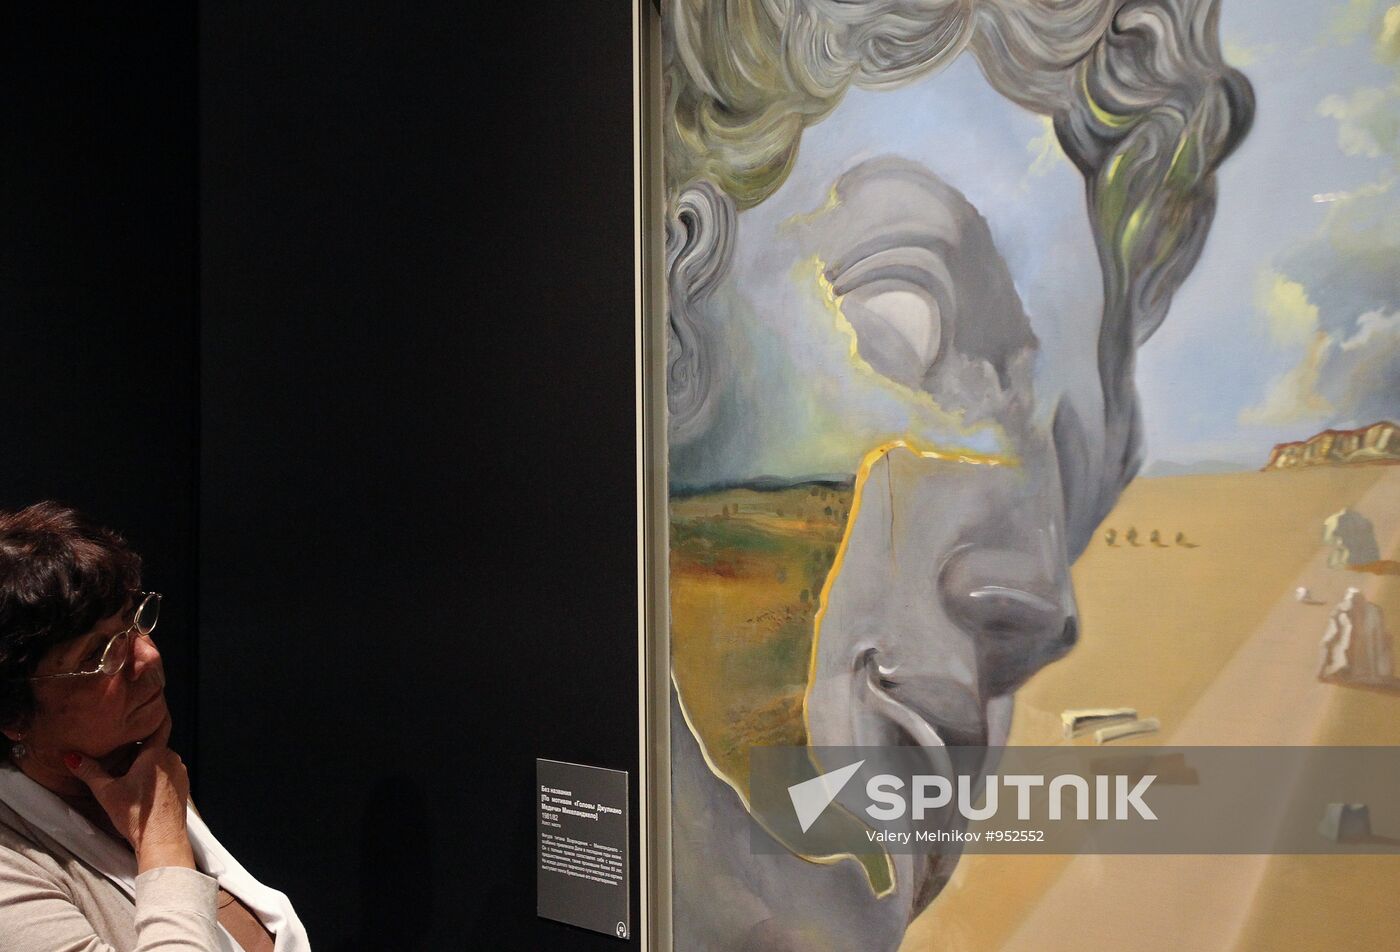 Exhibition of works by Salvador Dali opens at Pushkin Museum